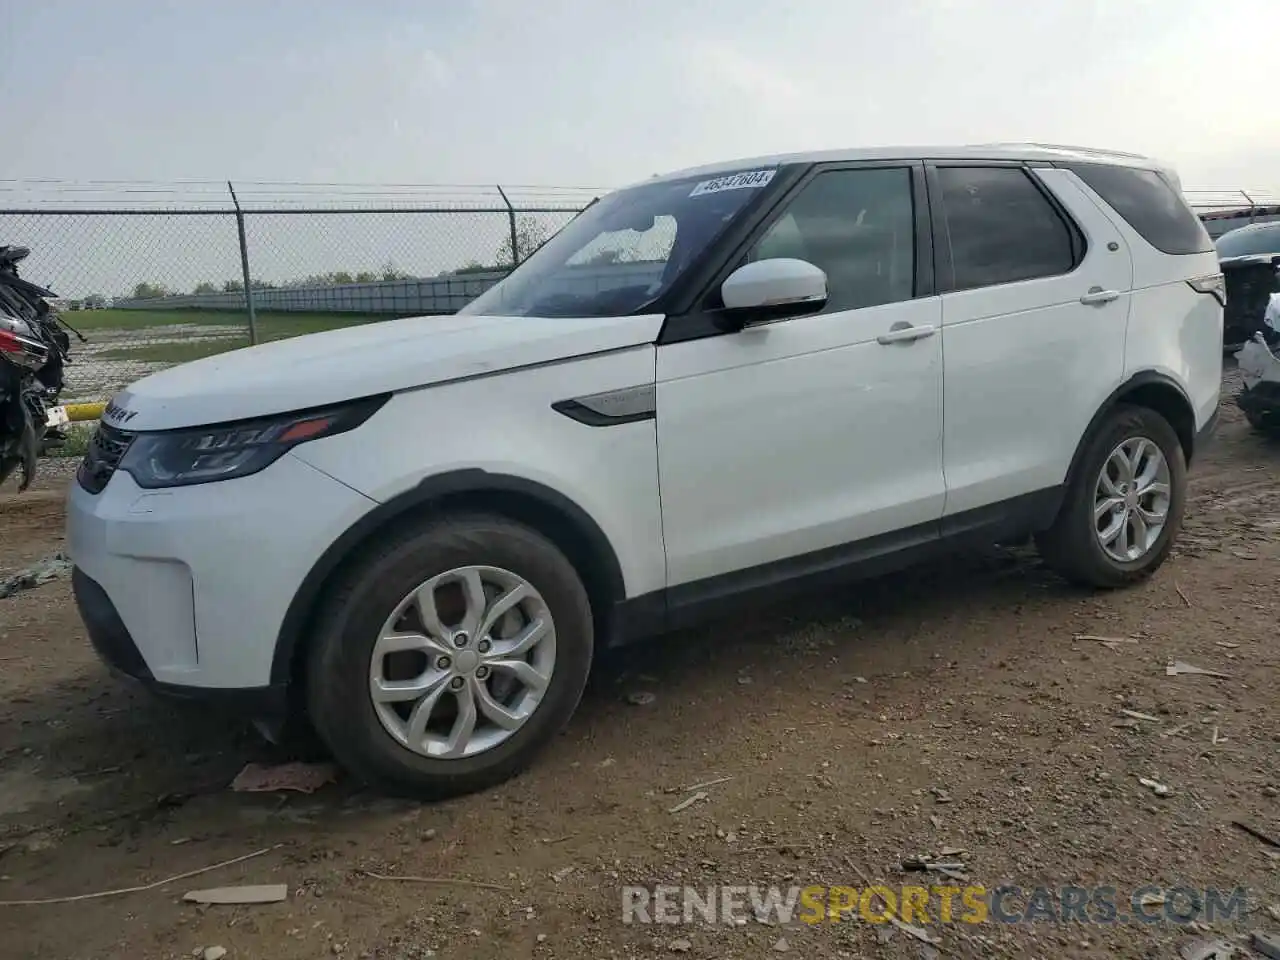 1 Photograph of a damaged car SALRG2RV0L2428116 LAND ROVER DISCOVERY 2020